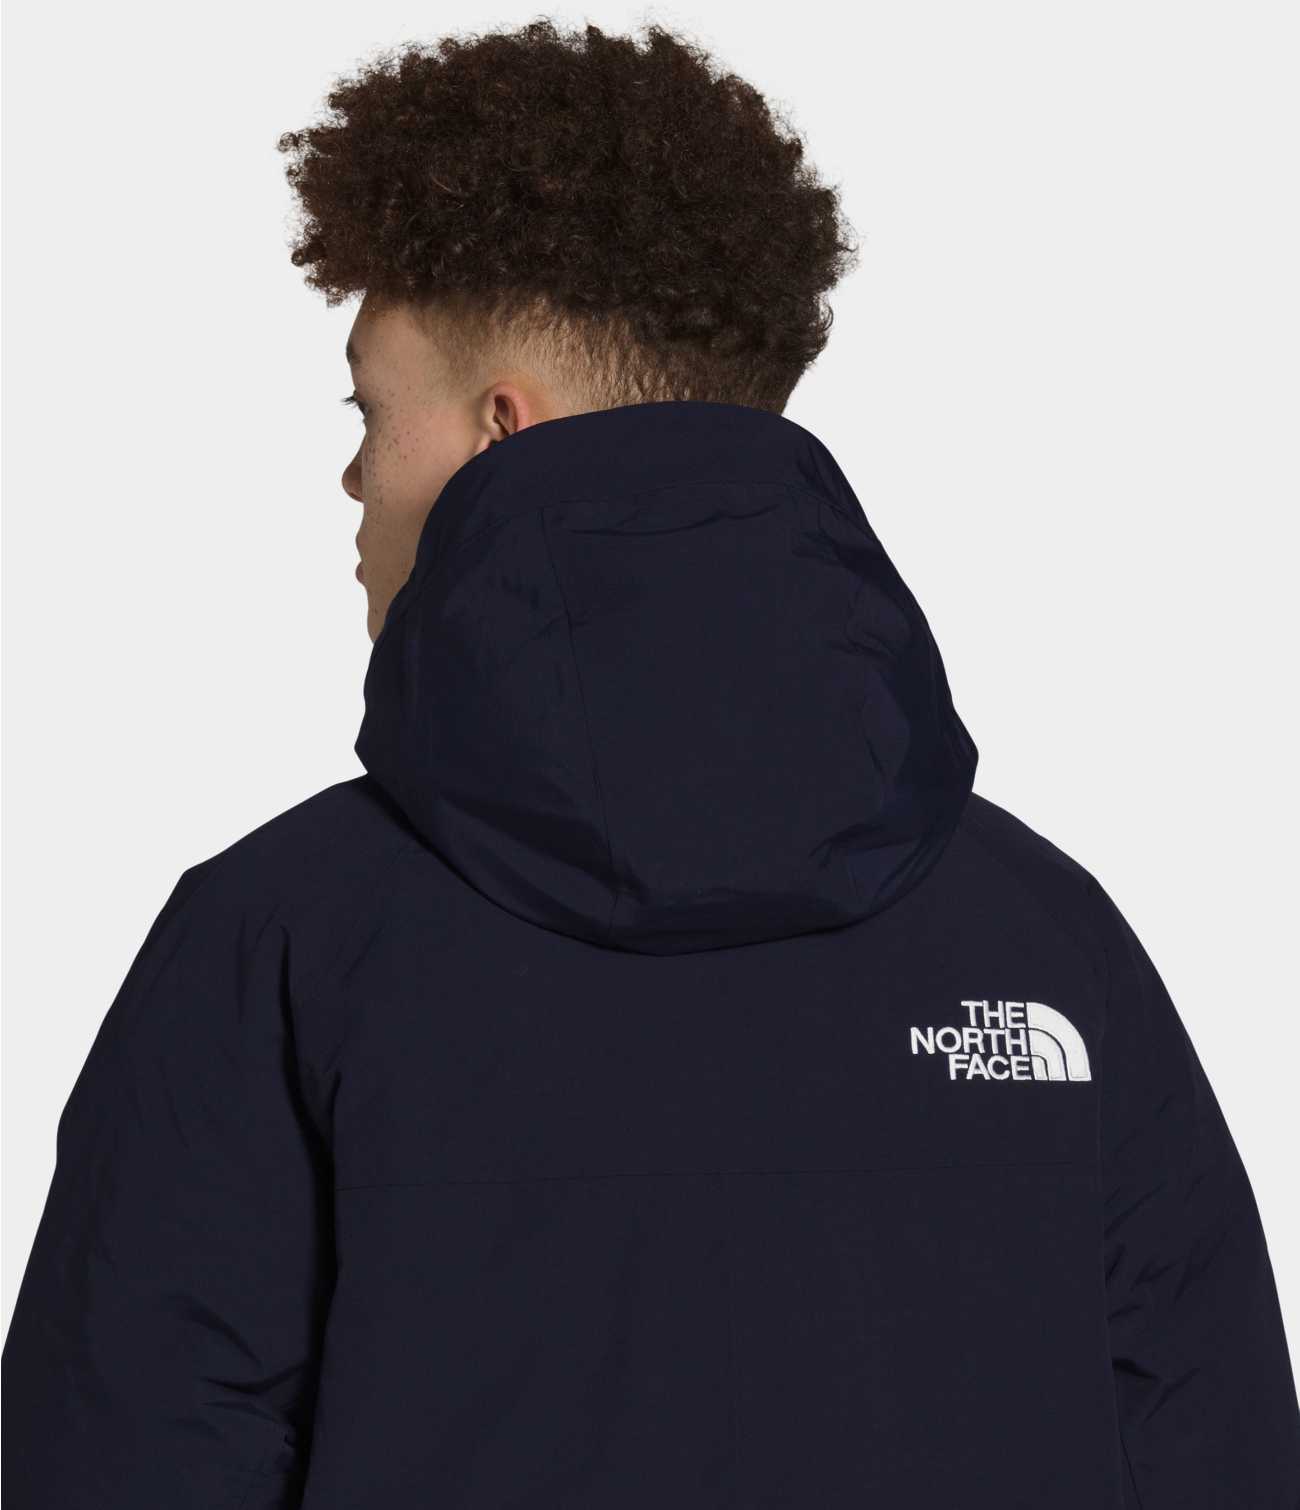 The North Face New Outer Boroughs Jacket身幅70cm